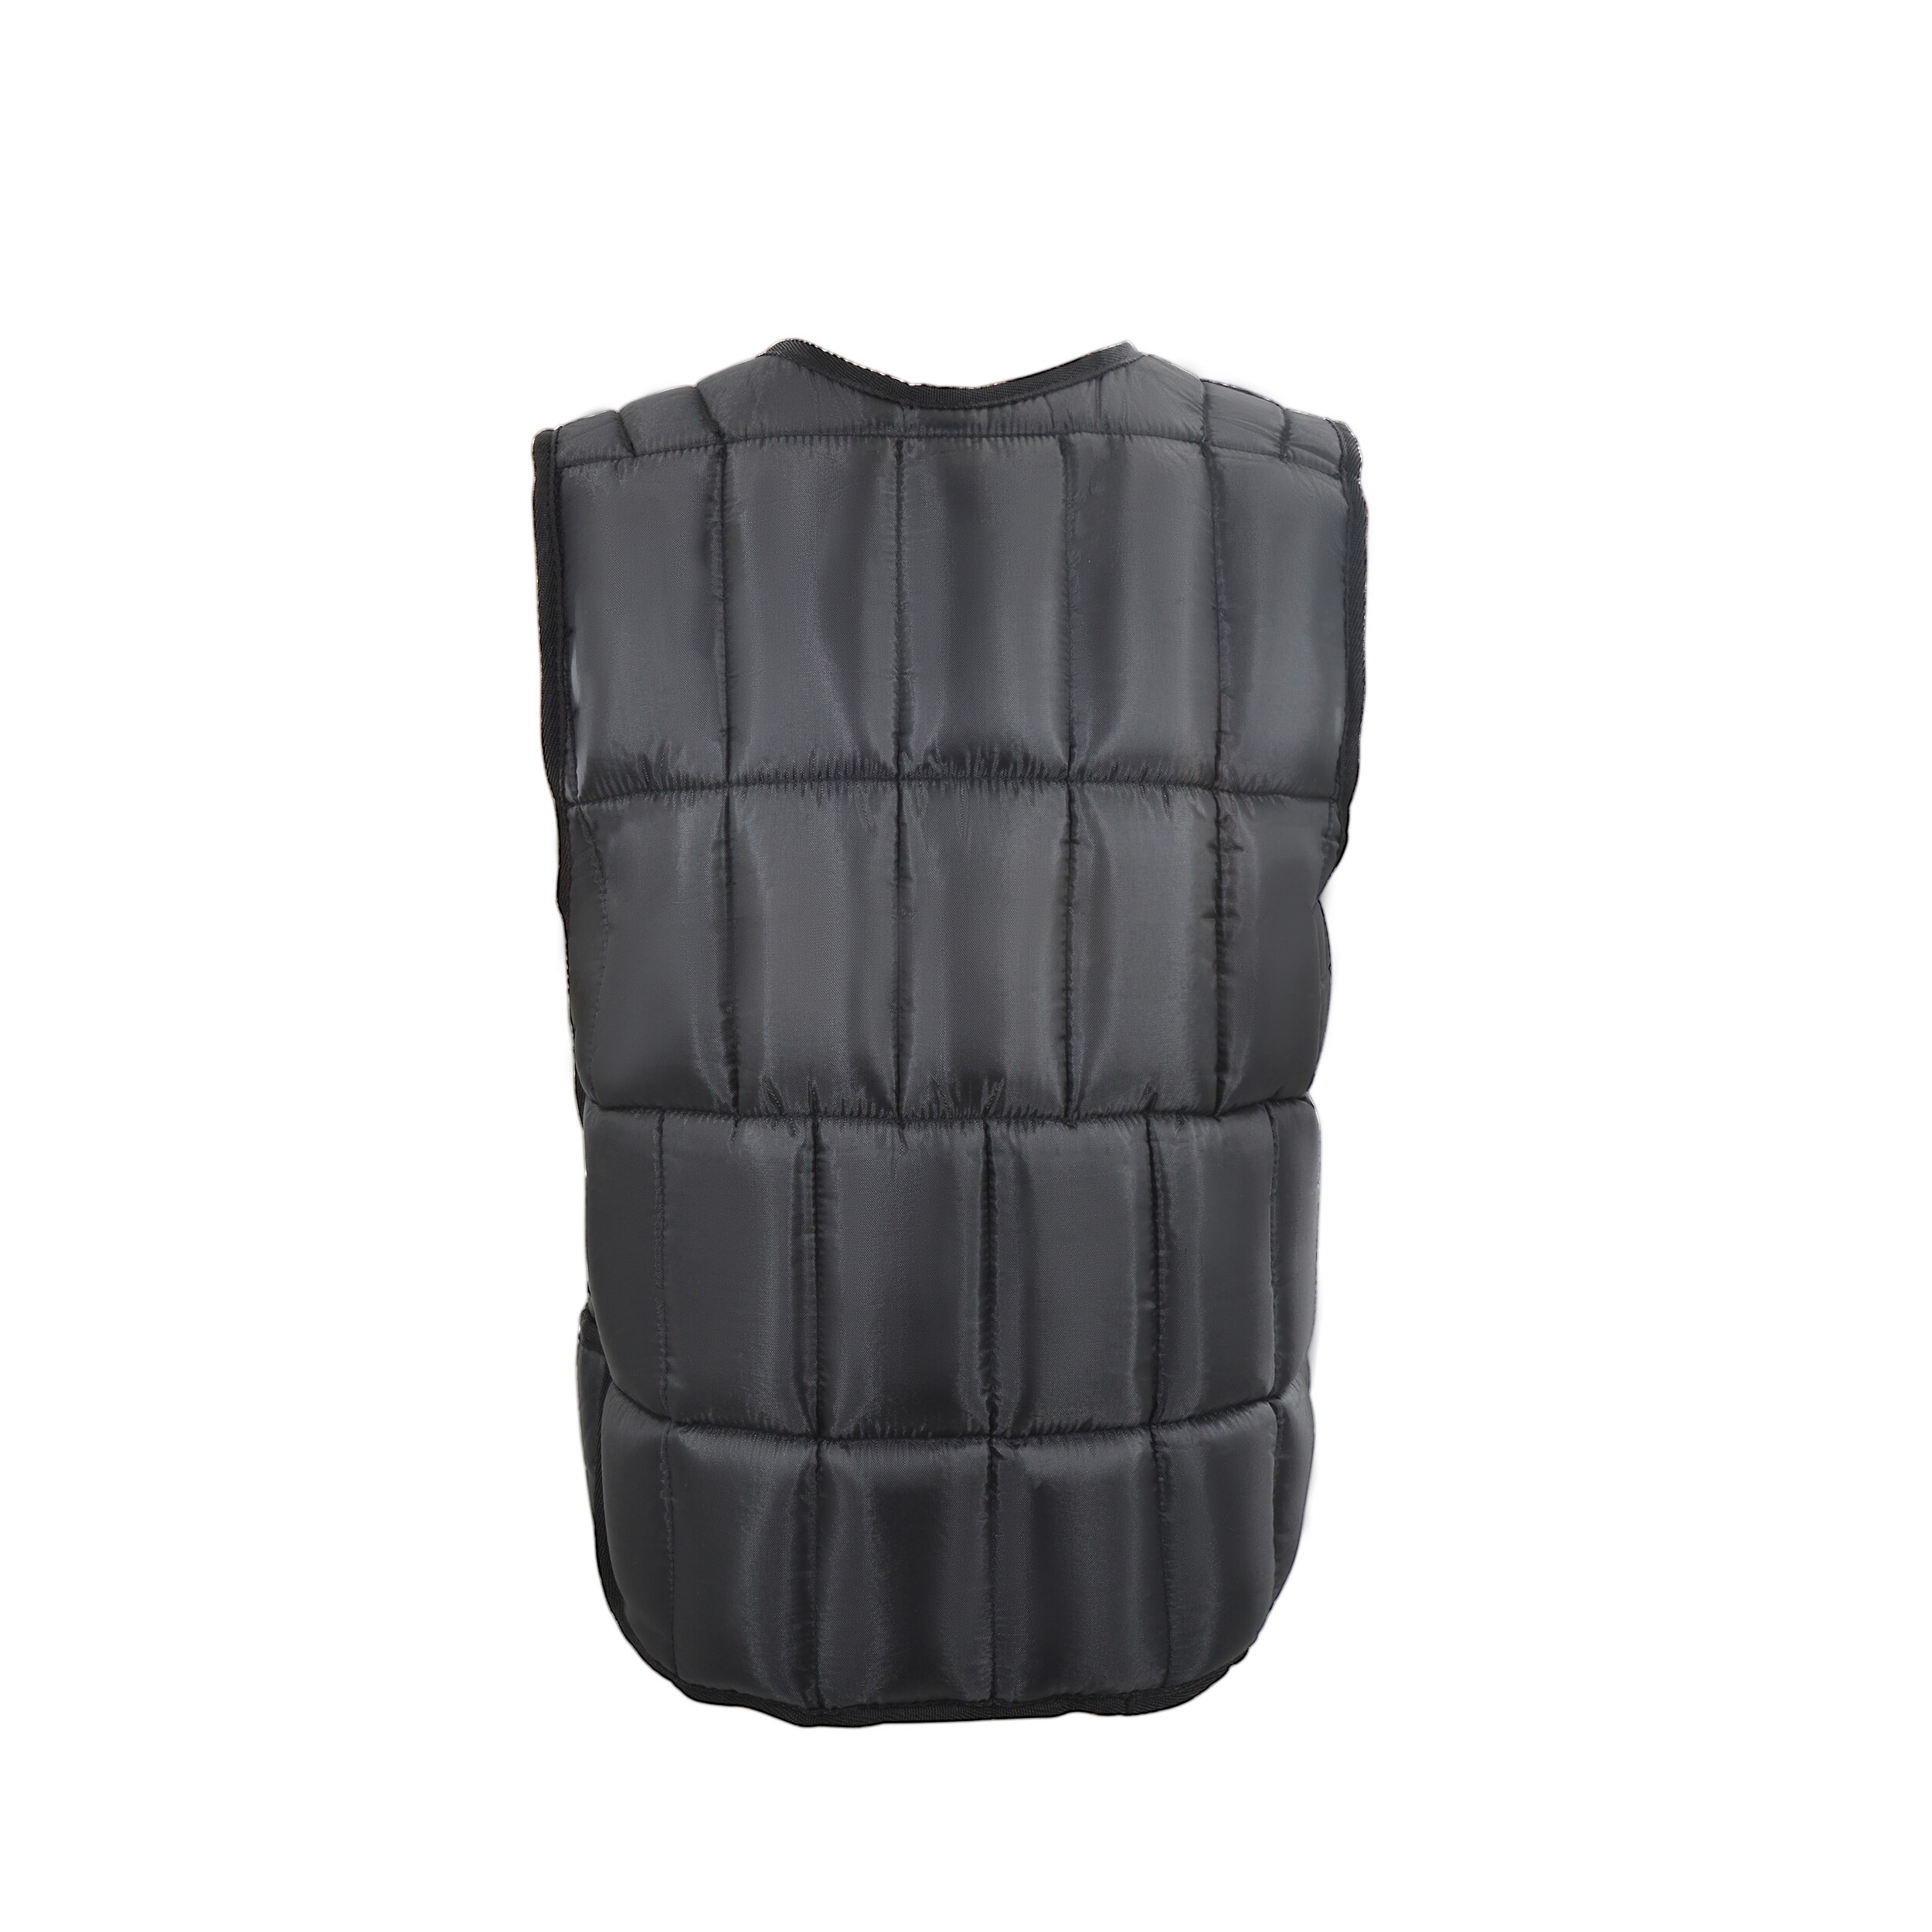 https://ak1.ostkcdn.com/images/products/is/images/direct/164c720dd69fc4f5cba5c689b95d45420aae7395/Men-Women-Adjustable-Weighted-Vest%2C-10lbs-Body-Weight-Sandbag-for-Cardio-Workout-Fitness-Training.jpg